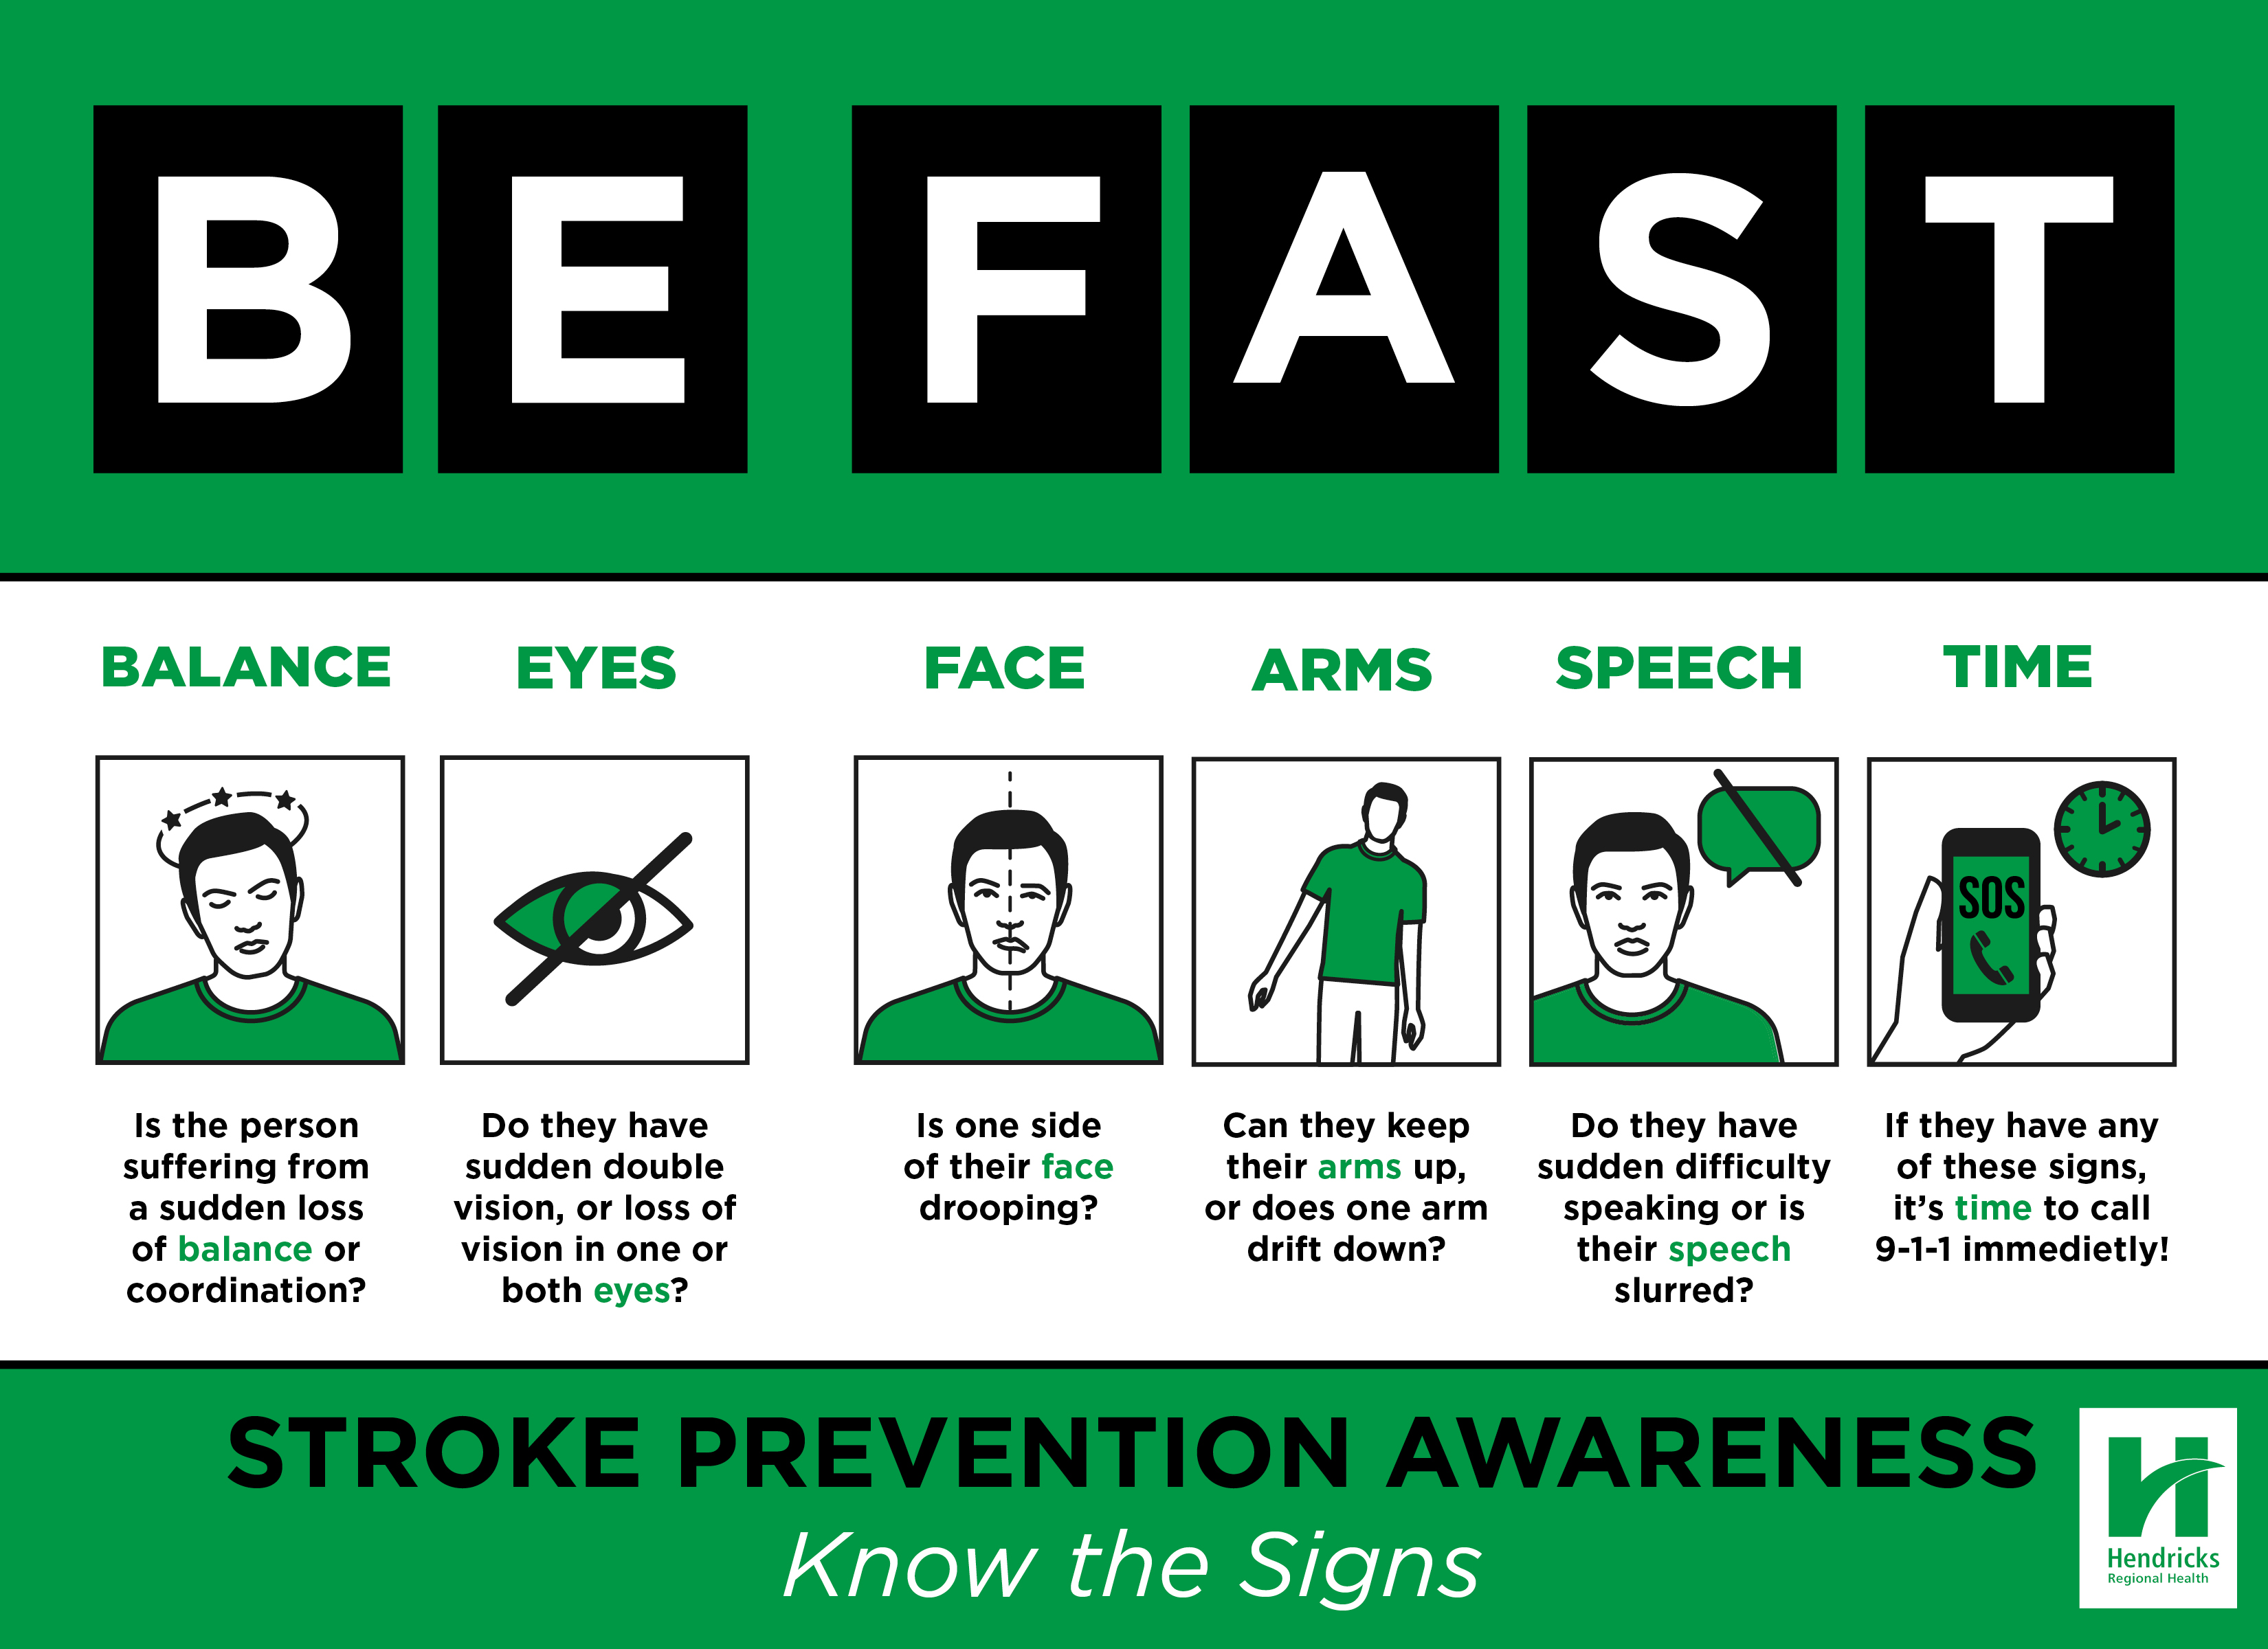 Be Fast to Recognize Signs of Stroke